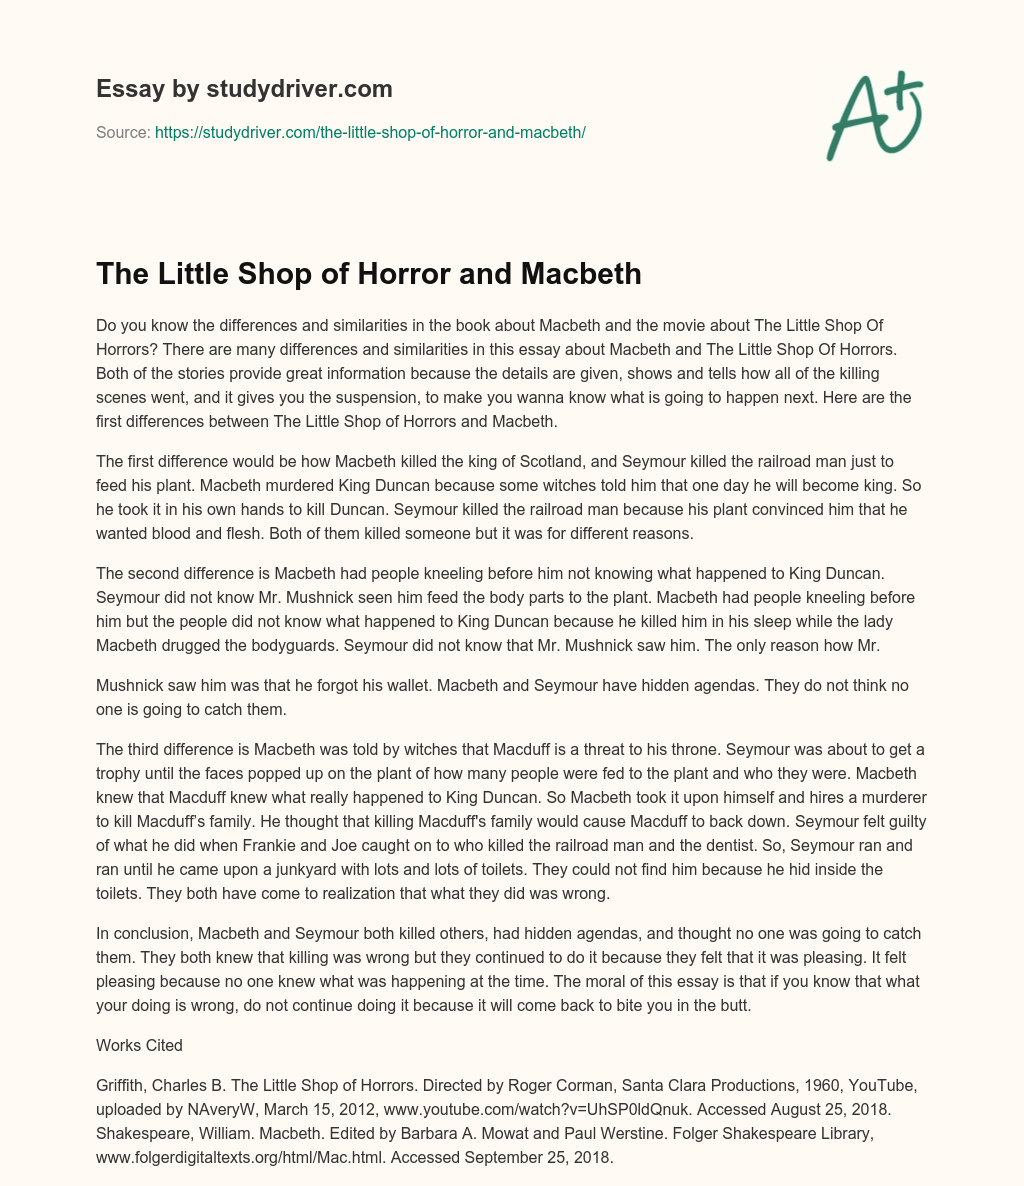 The Little Shop of Horror and Macbeth essay